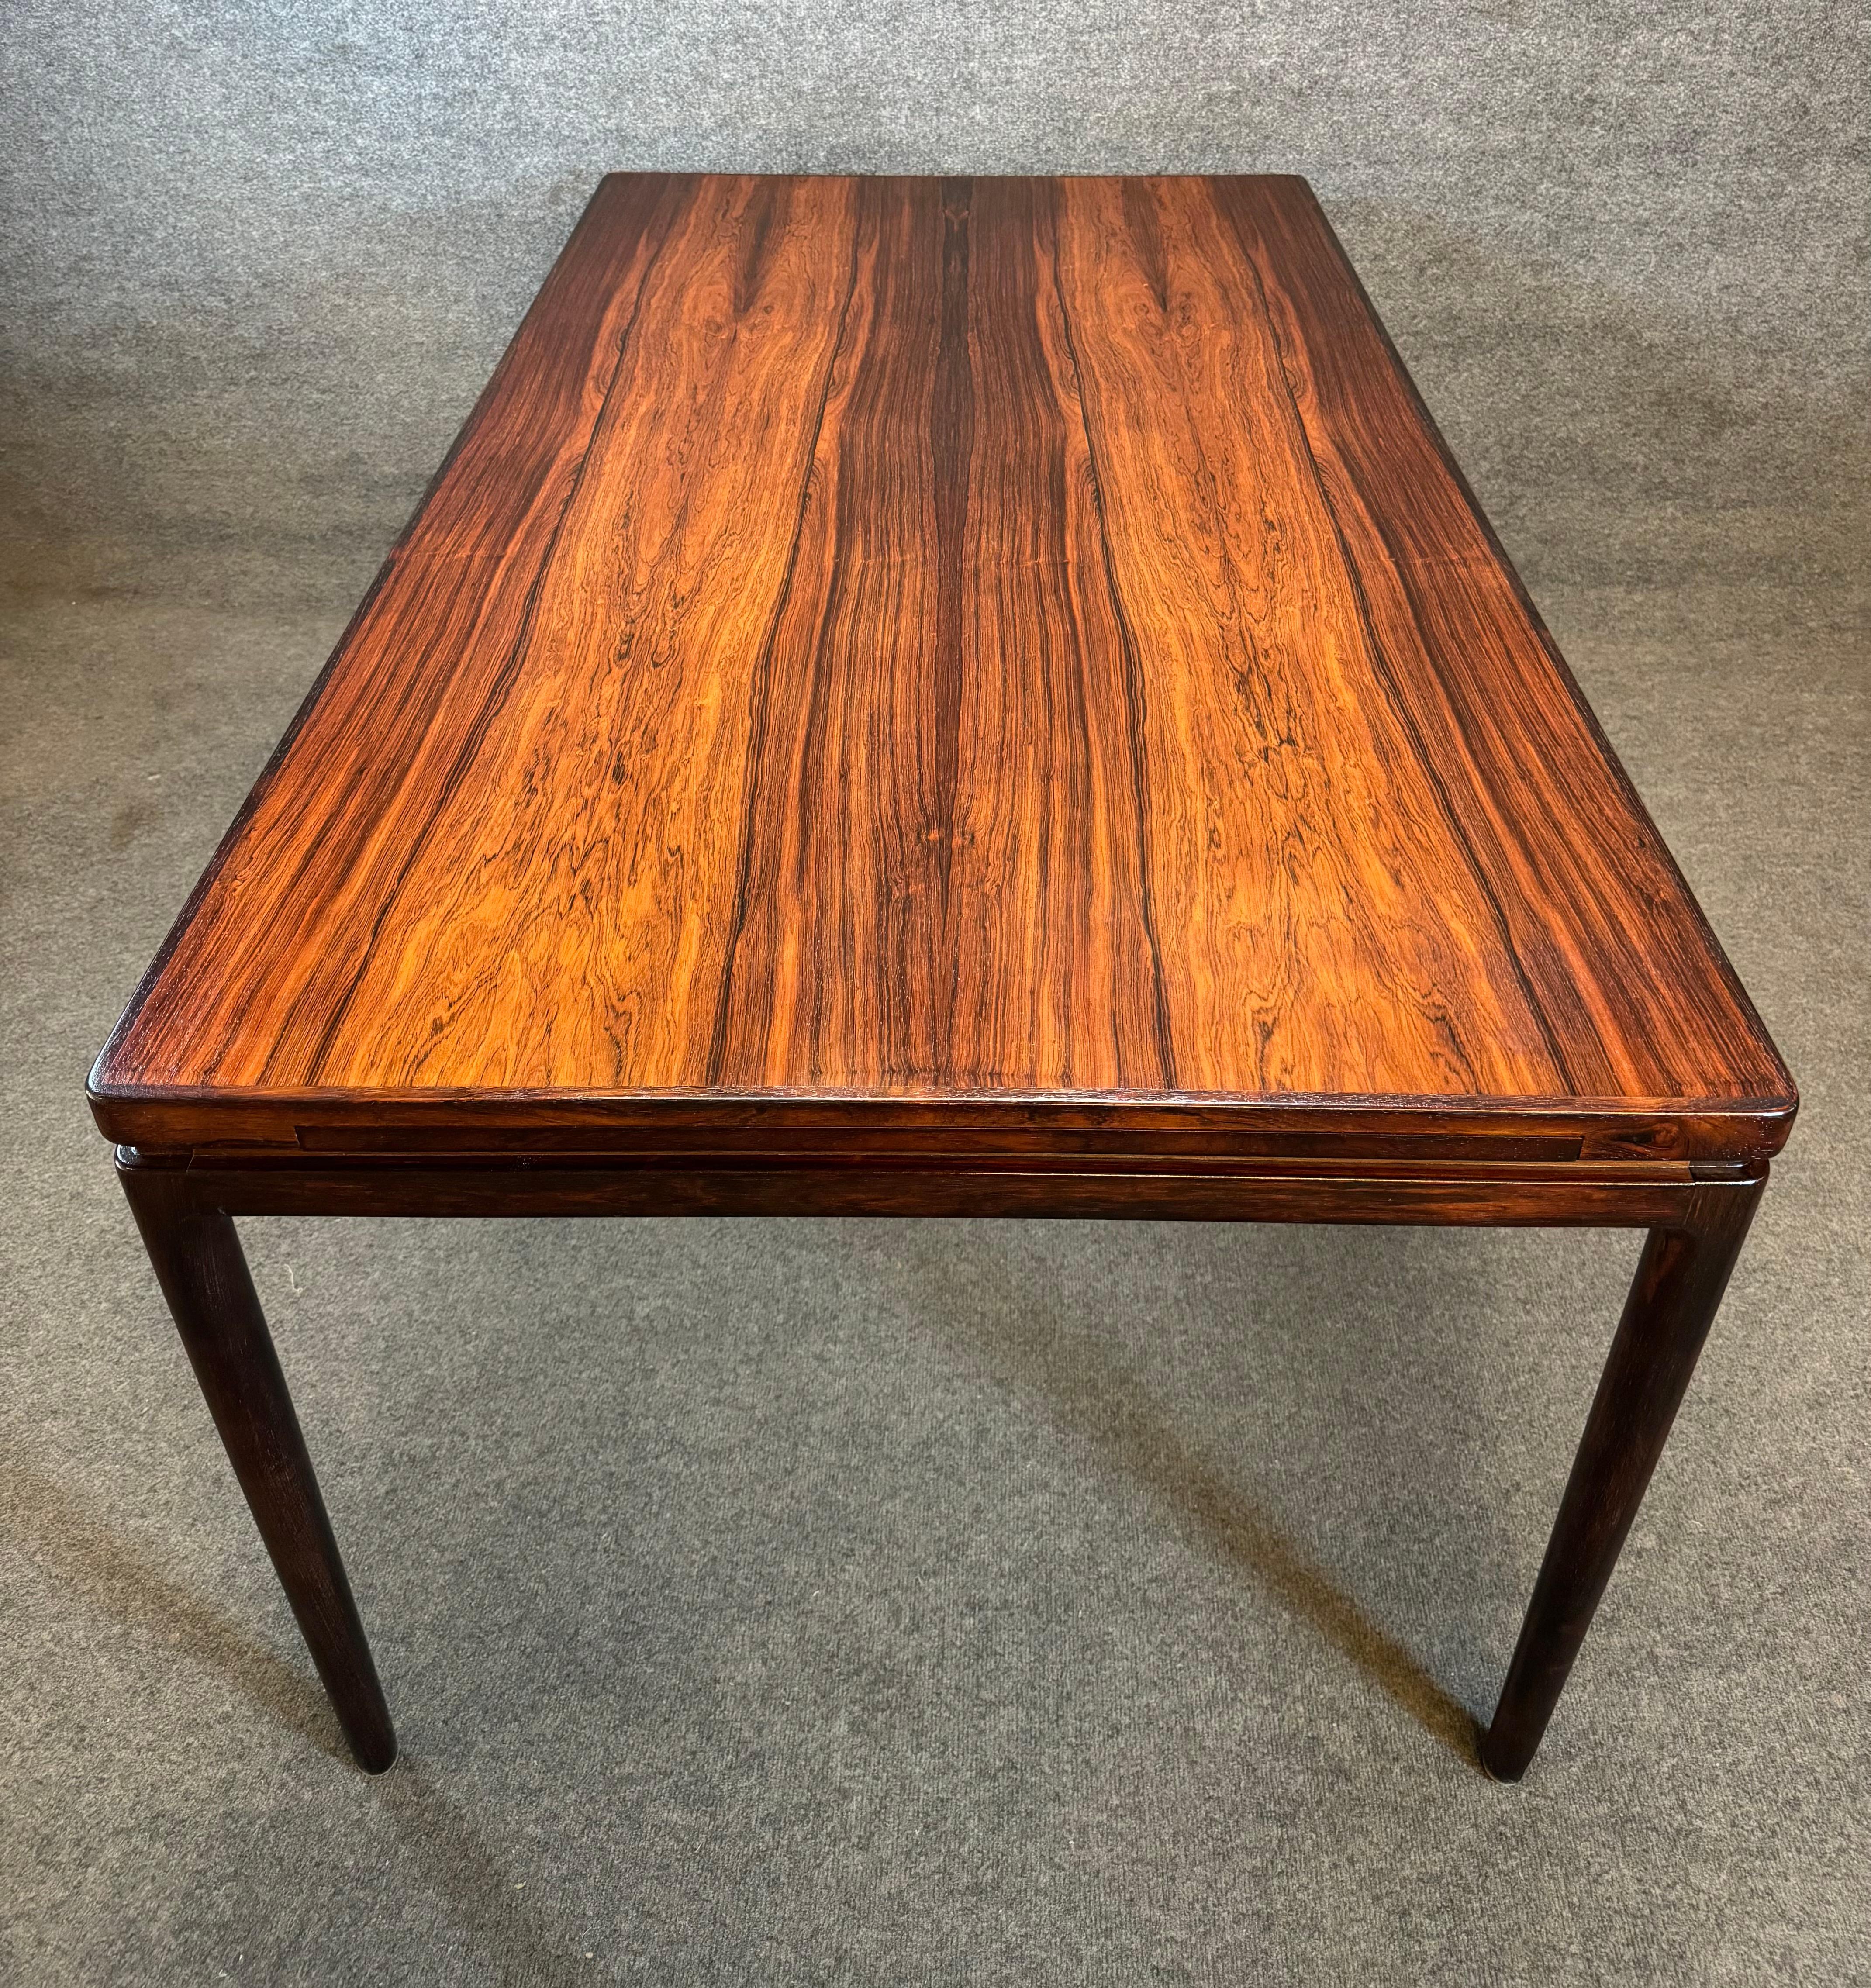 Here is a beautiful Scandinavian modern large dining table in rosewood designed by Johannes Andersen and manufactured by Christian Linneberg in Denmark in the 1960's.
This exquisite table, recently imported from Europe to California before its